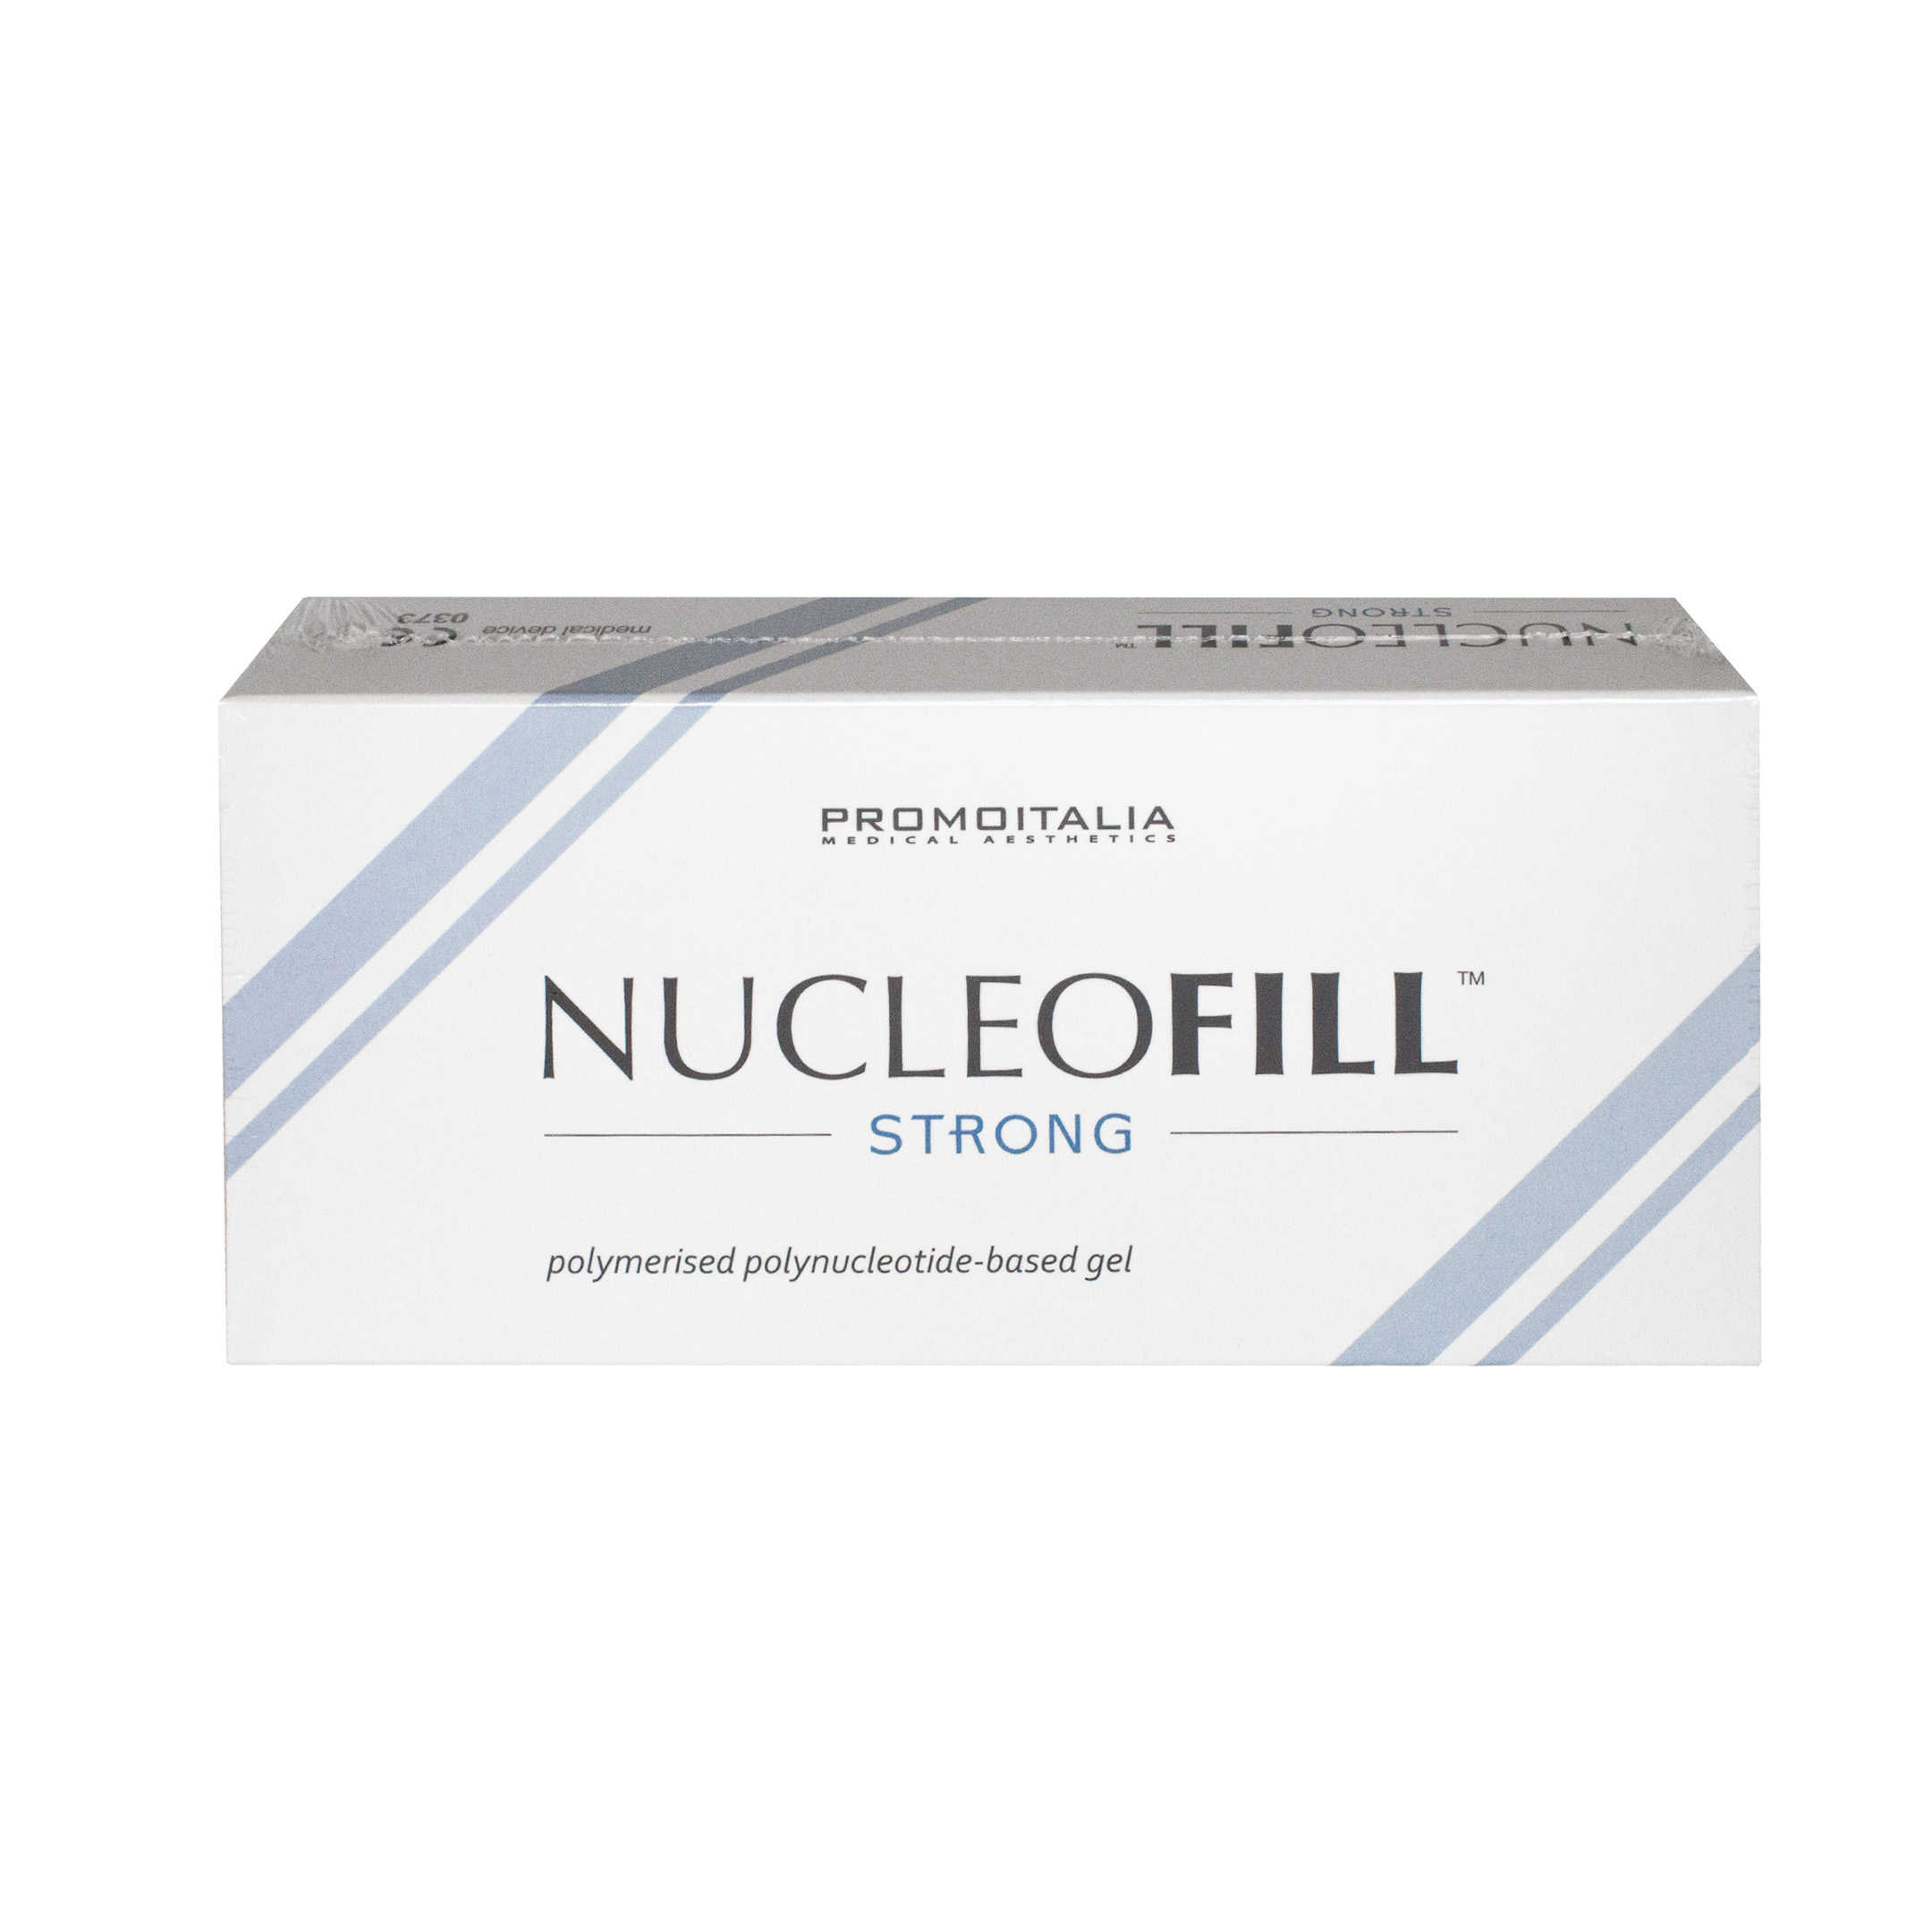 Nucleofill strong front